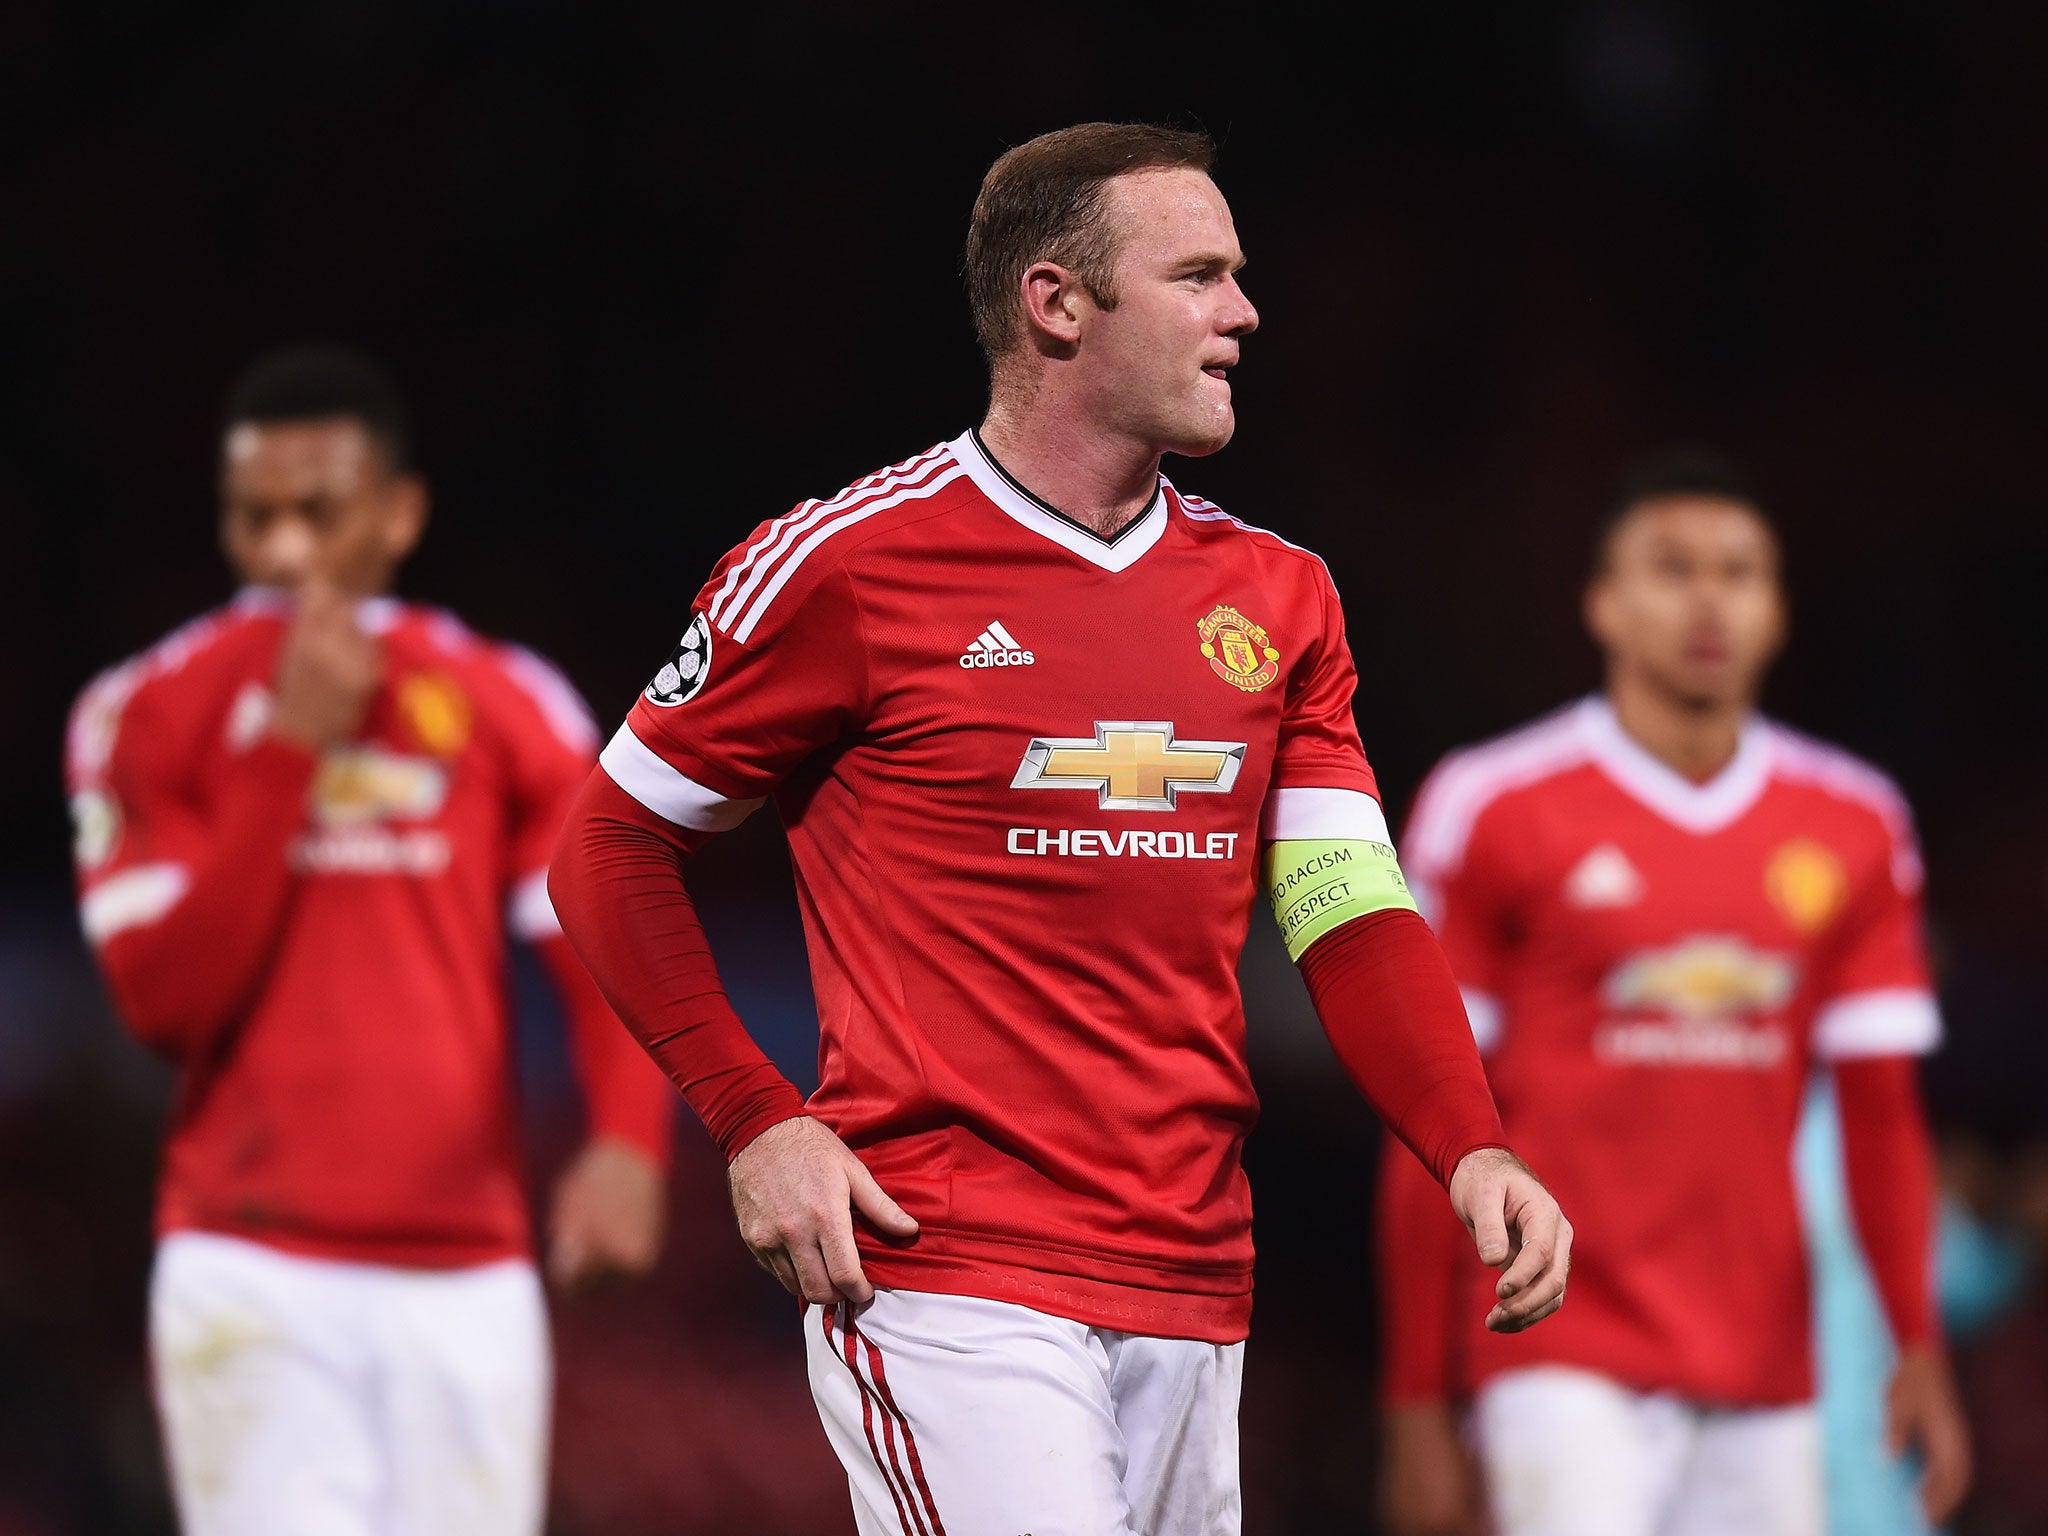 Manchester United captain Wayne Rooney starts against Norwich